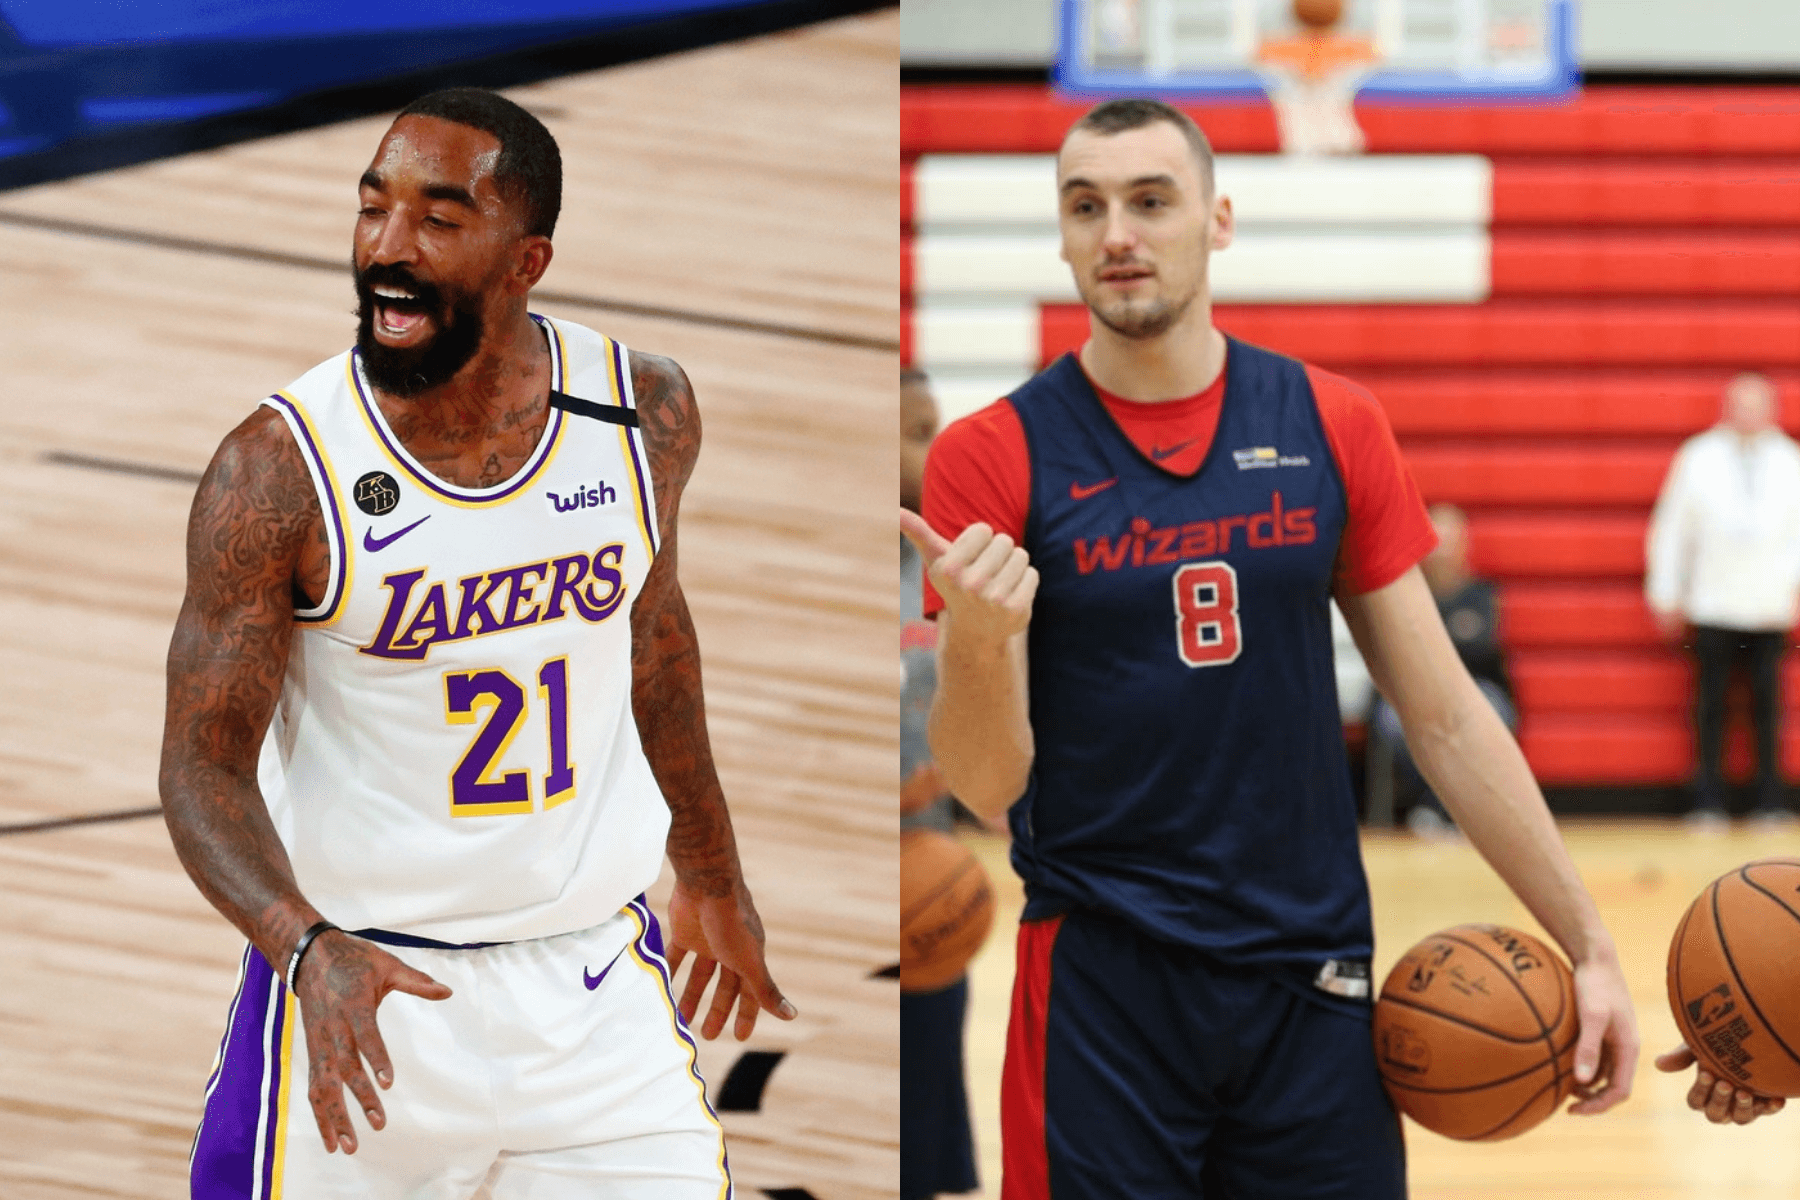 Sam Dekker of the Washington Wizards and J.R. Smith of the Los Angeles Lakers